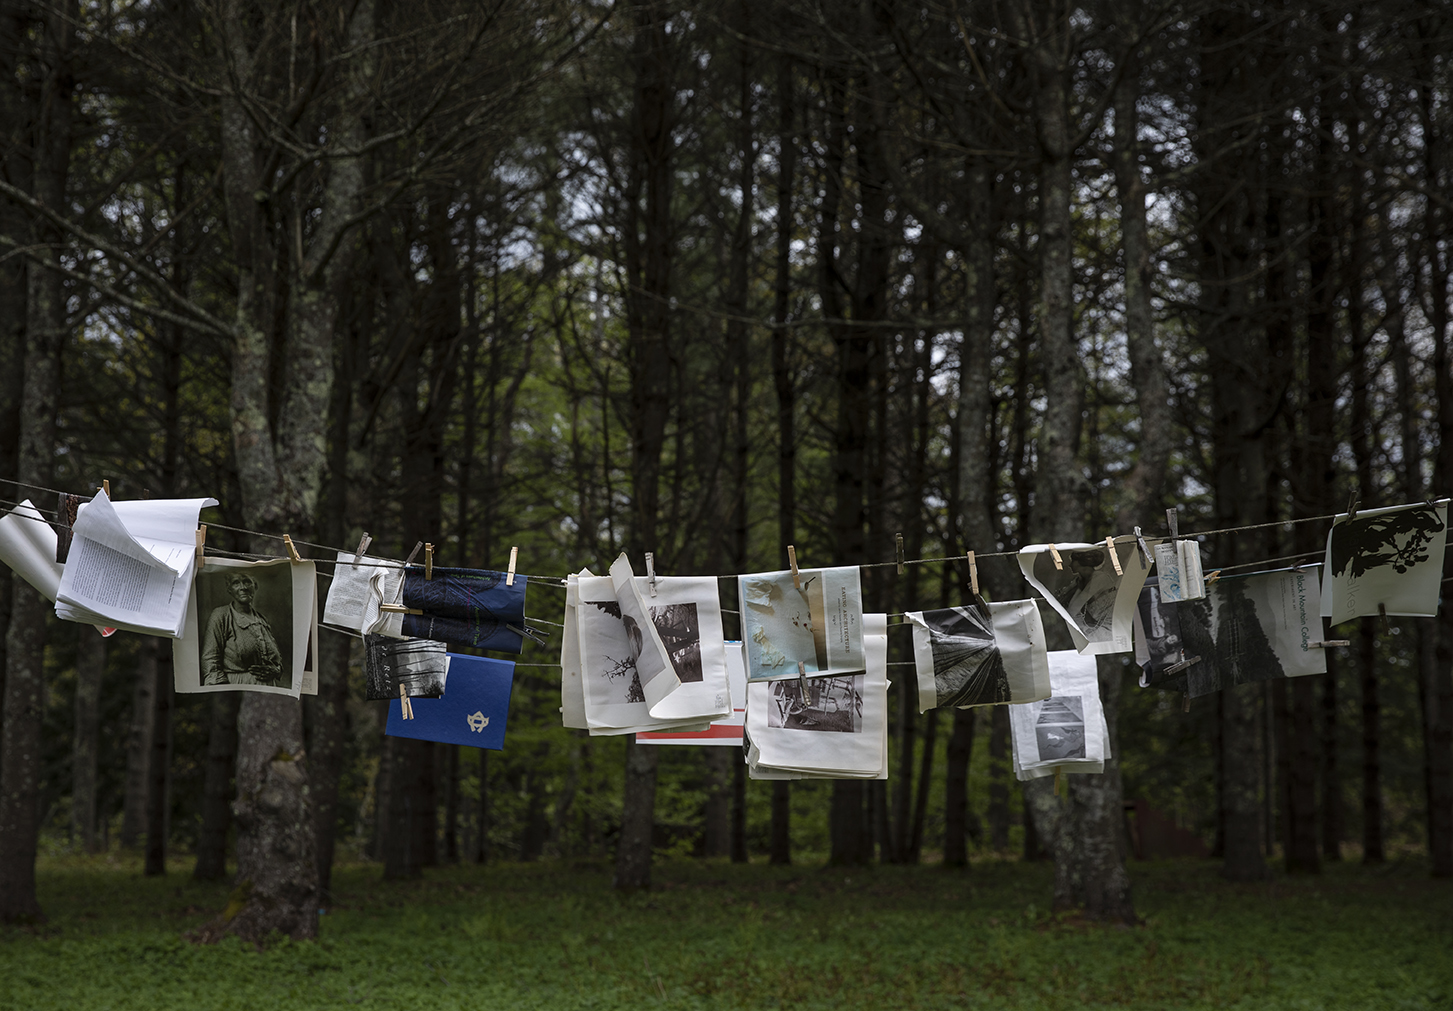 closeline with magazines, manuscripts and photos clipped to it, in front of dark woods.